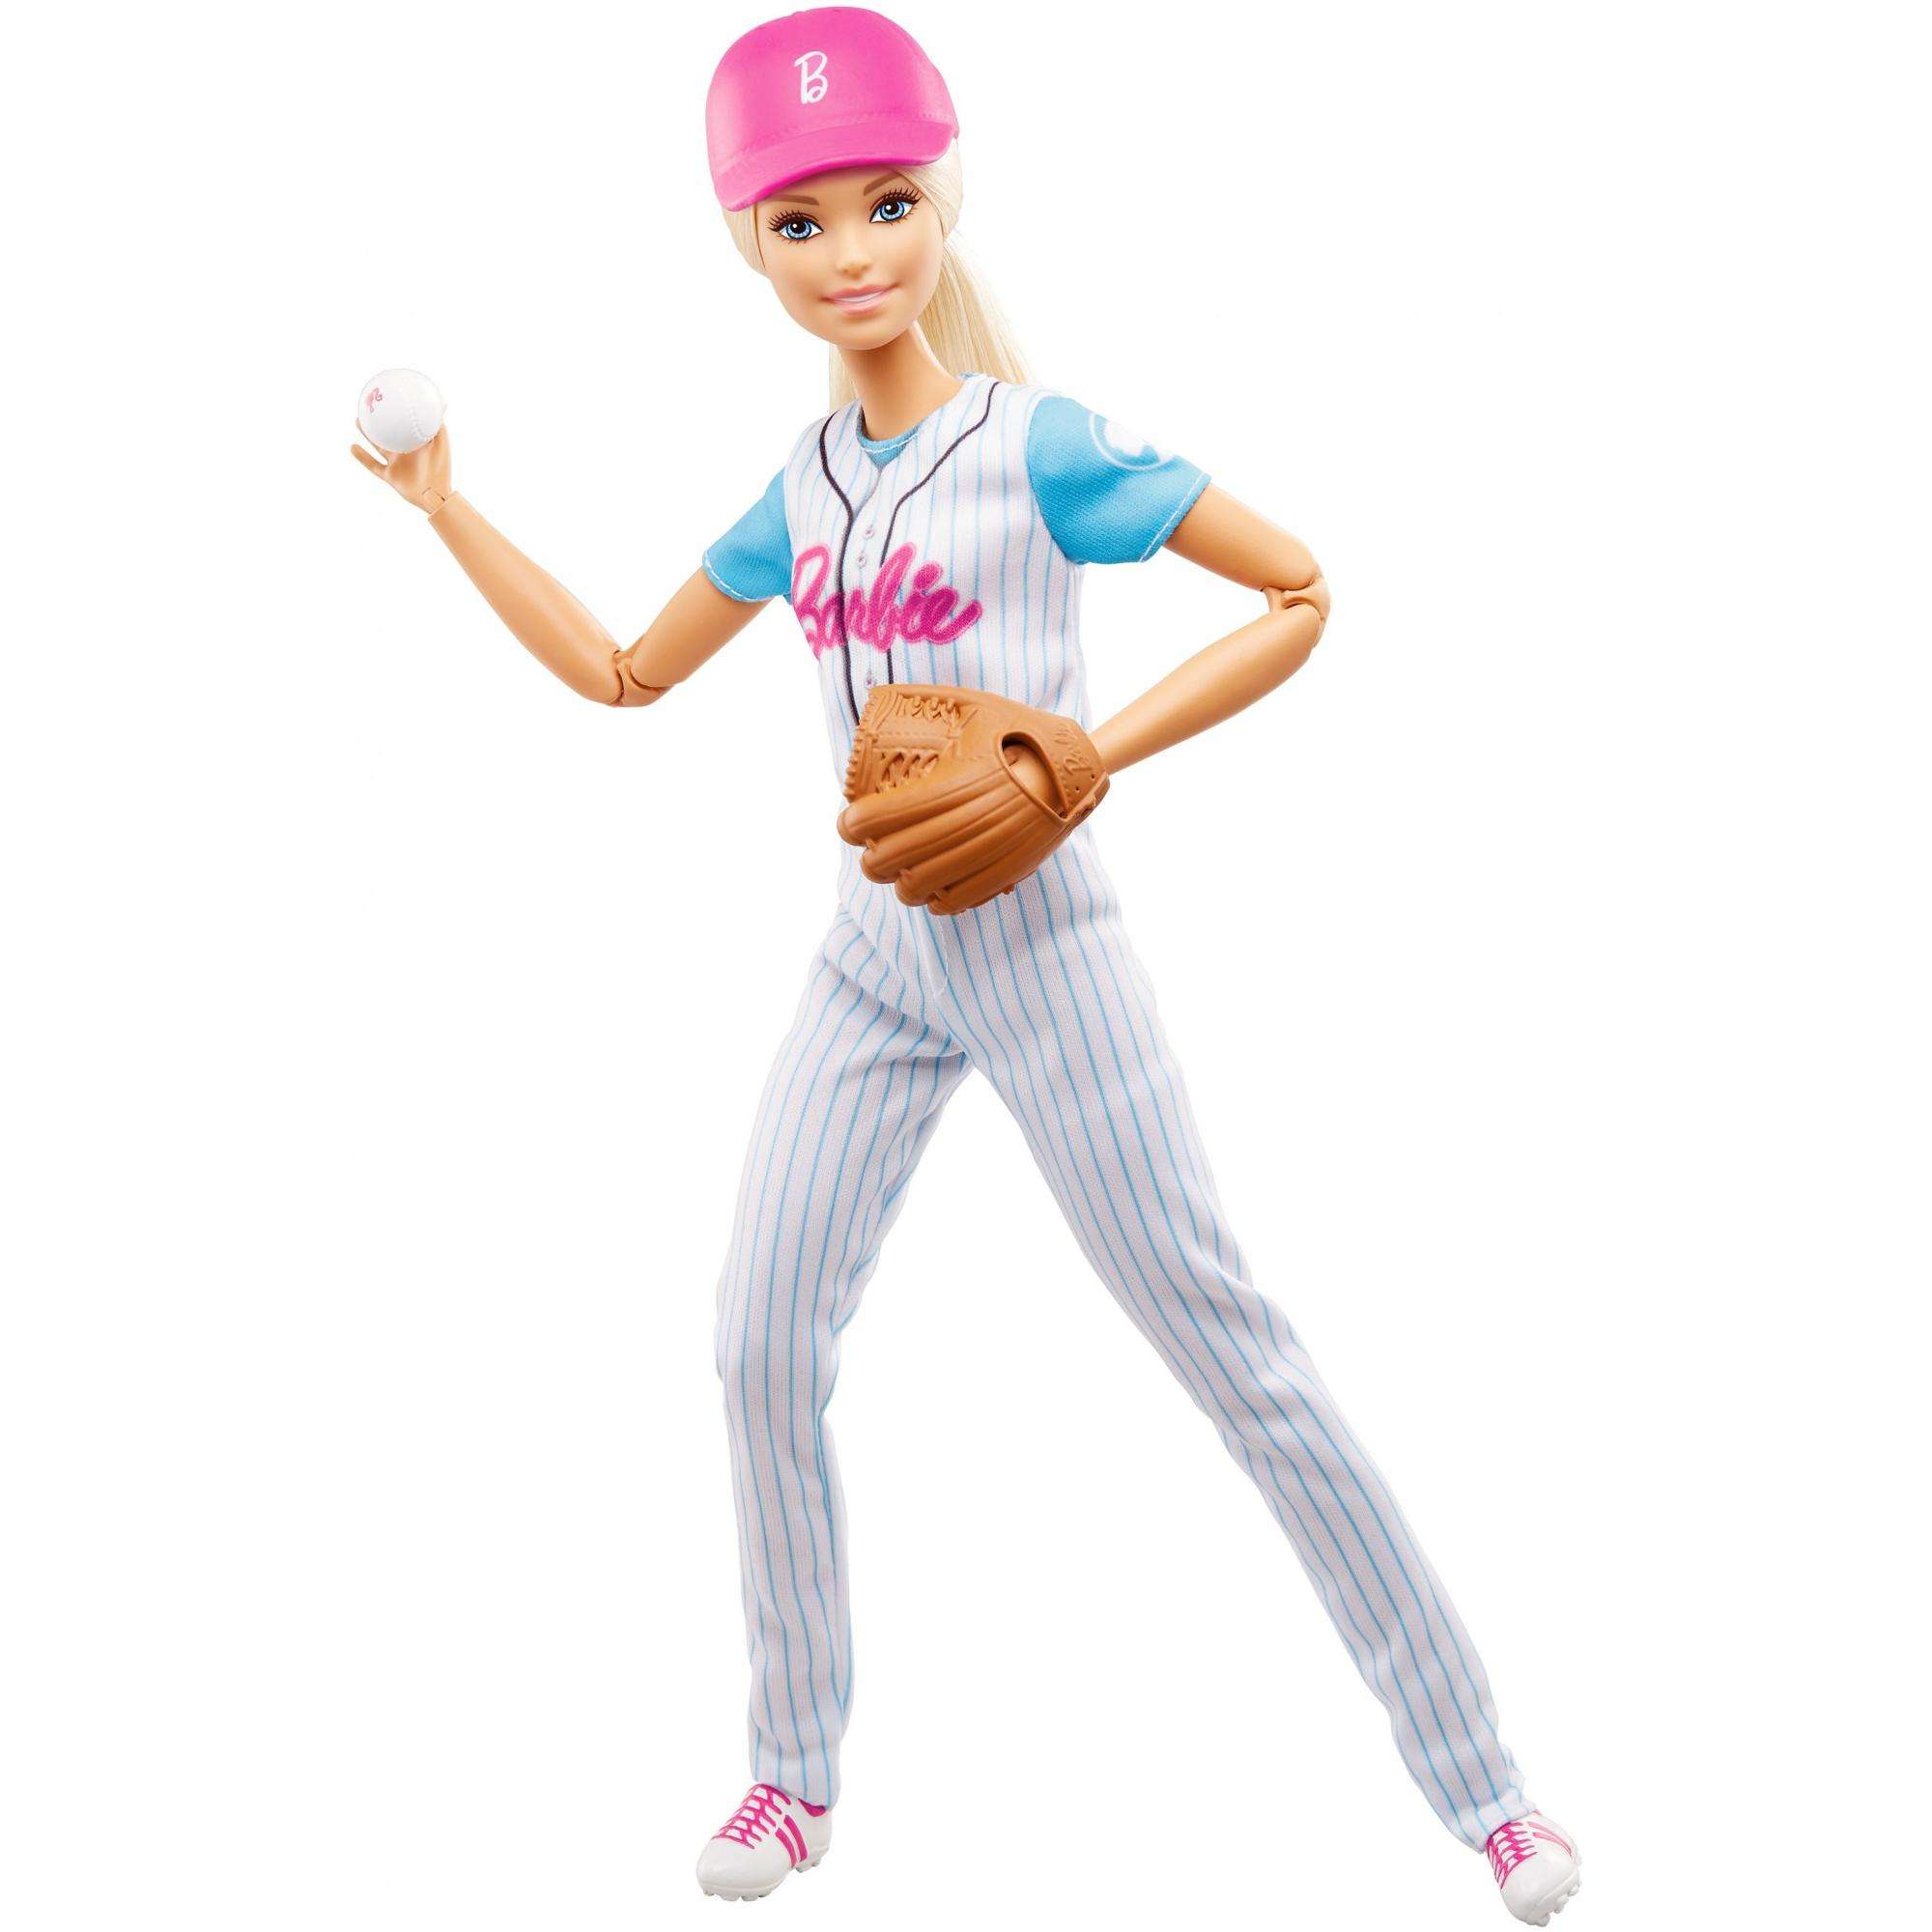 Barbie Made To Move Baseball Player Doll with Baseball & Mitt Doll Playset - image 1 of 7